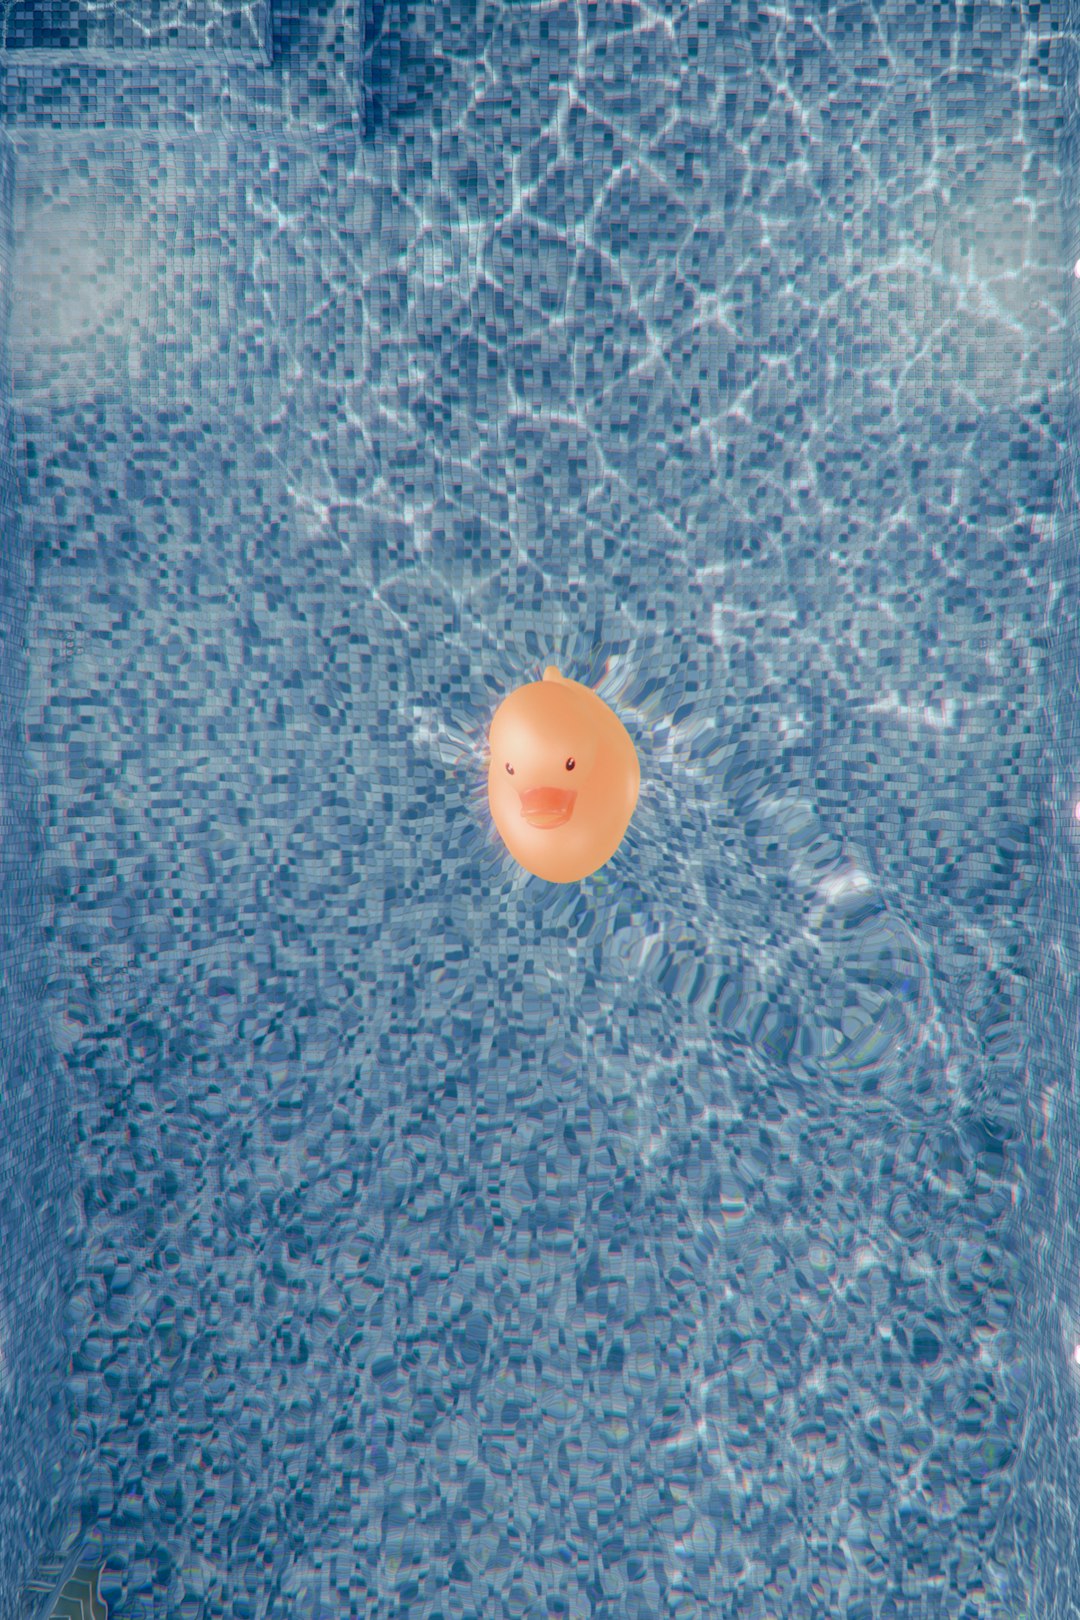 Bright rubber duck floats in blue water pool.